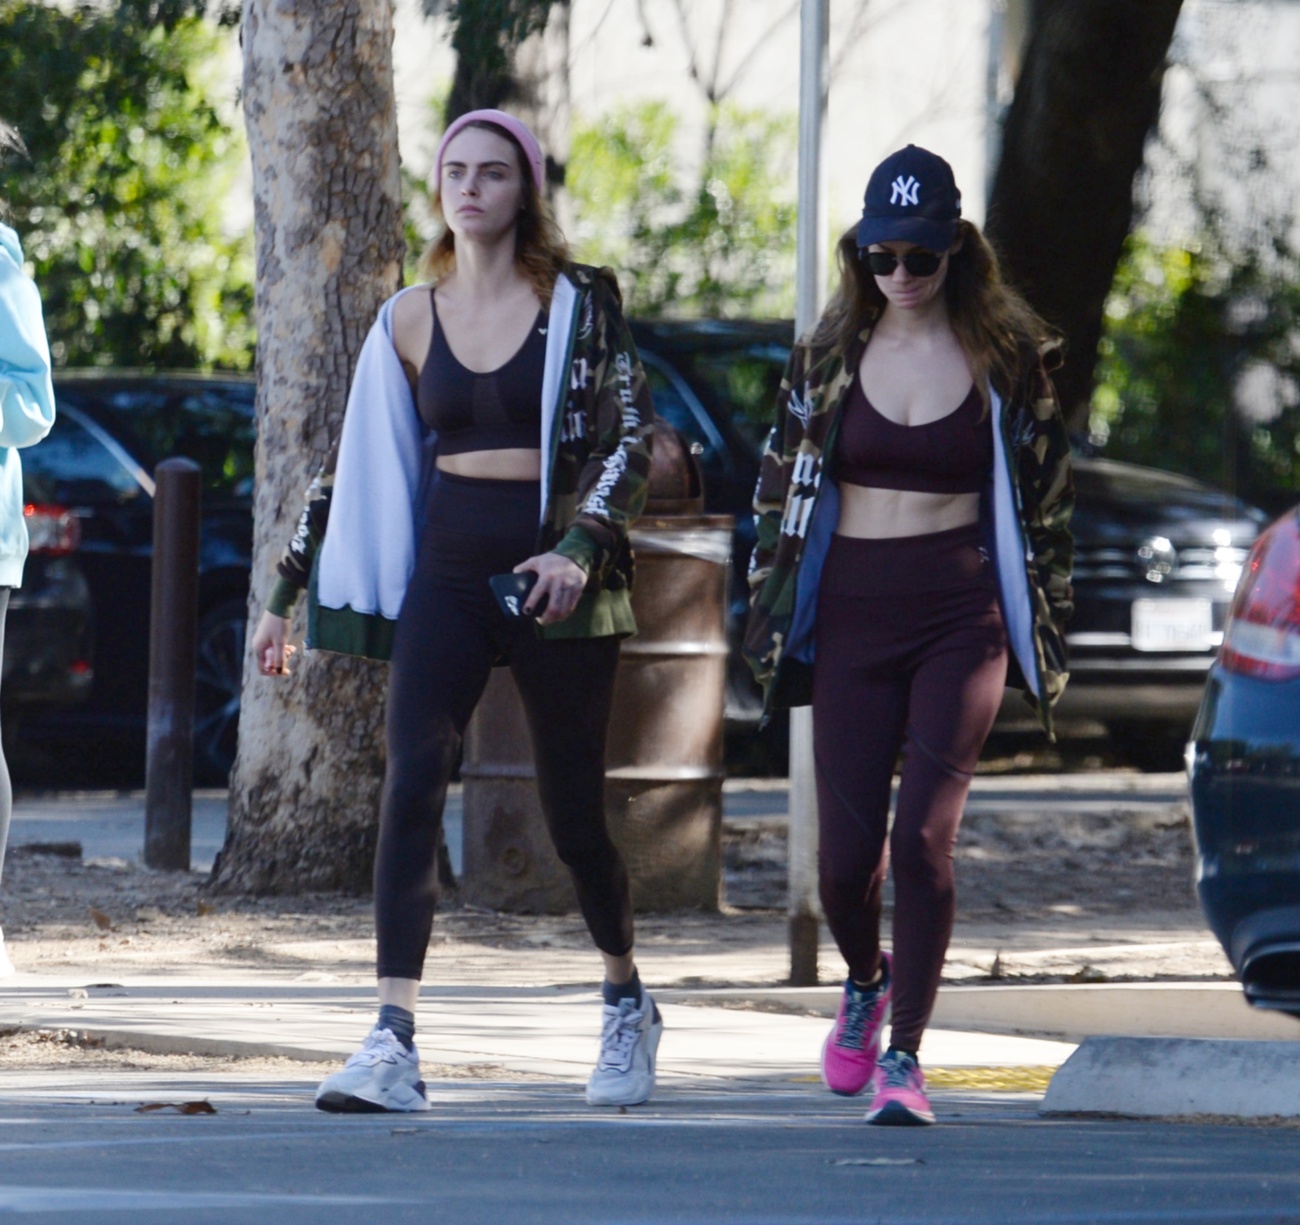 Actress and model Cara Delevingne is seen in love and very happy on the streets of Los Angeles